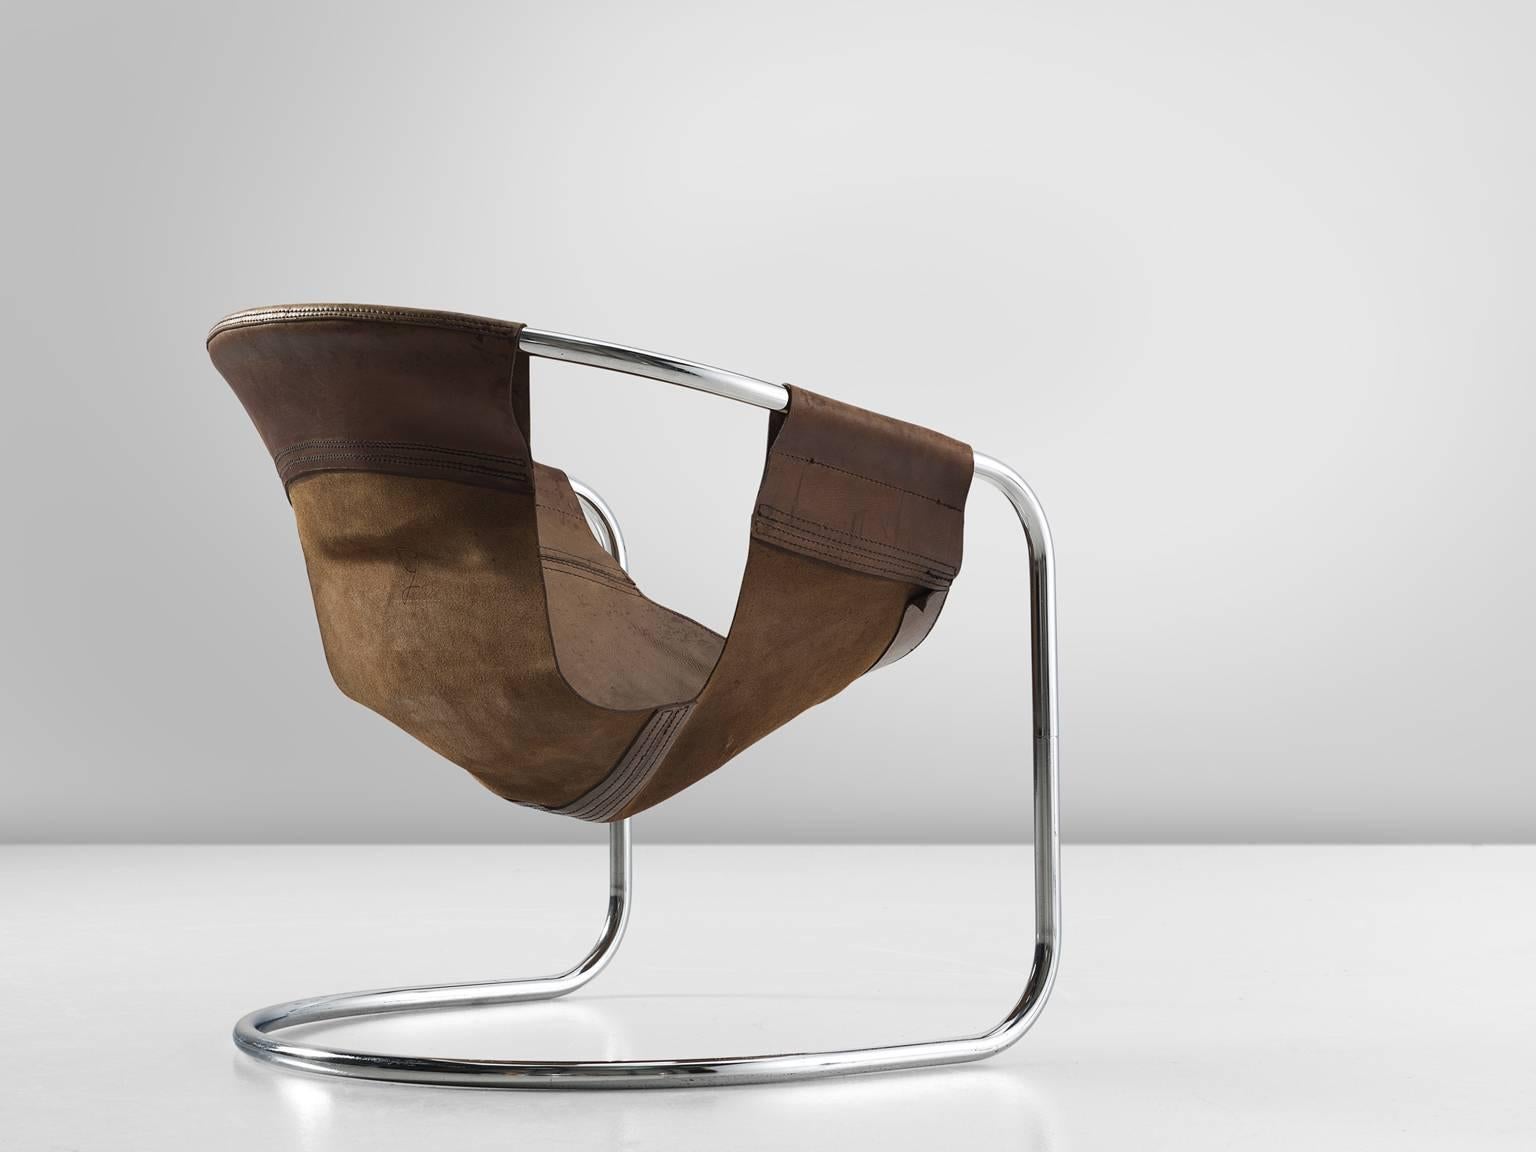 Chair, leather and chrome, 1965, The Netherlands.

This brown leather chair is both geometric and rustic in its style. The lounge chair was designed by Clemens Claessen for Ba-as Eindhoven, Holland, 1965. These chairs were made on a very small-scale